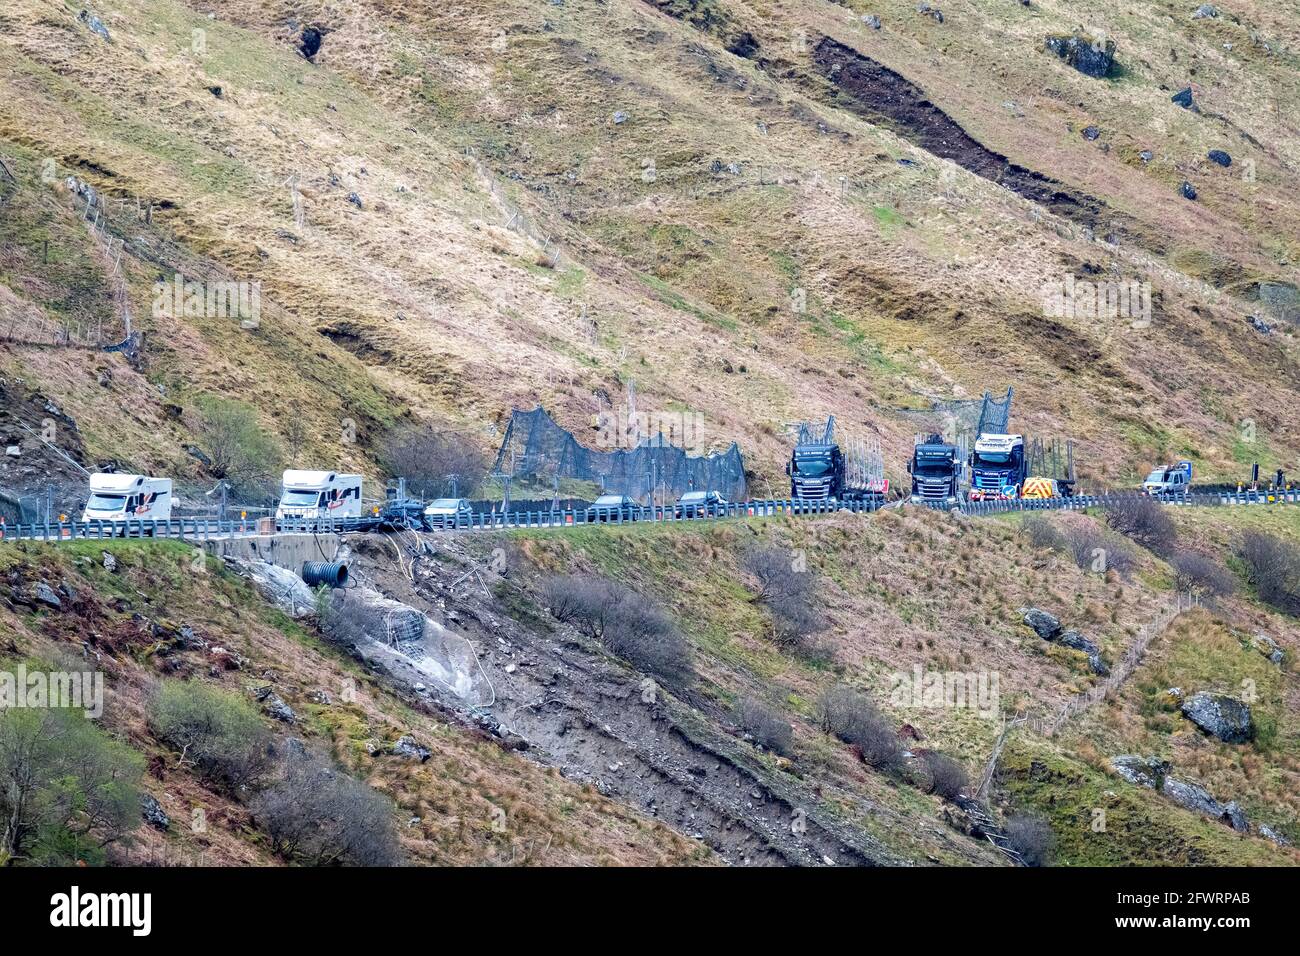 Traffic passing through traffic control on the A83 at the Rest and be Thankful, Argyll, Scotland. The road is under repair due to landslides. Stock Photo